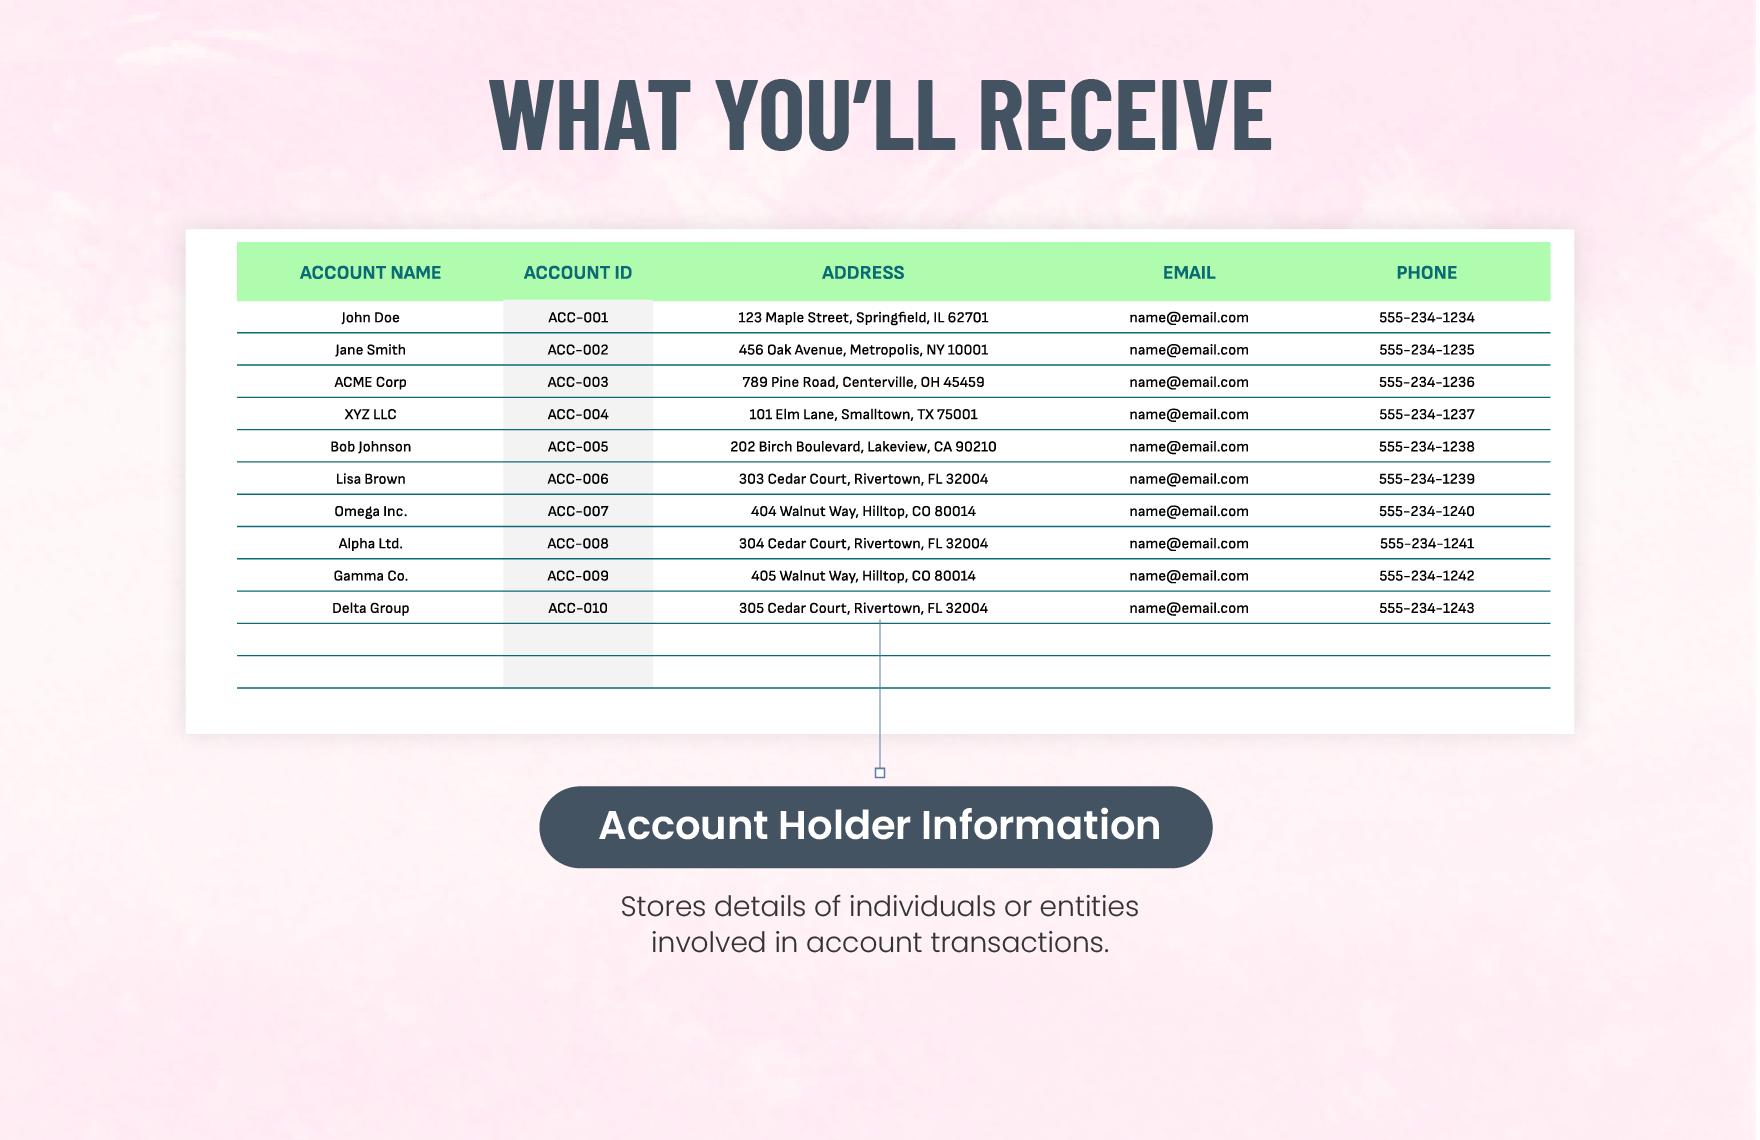 Account Settlement Tracking Template